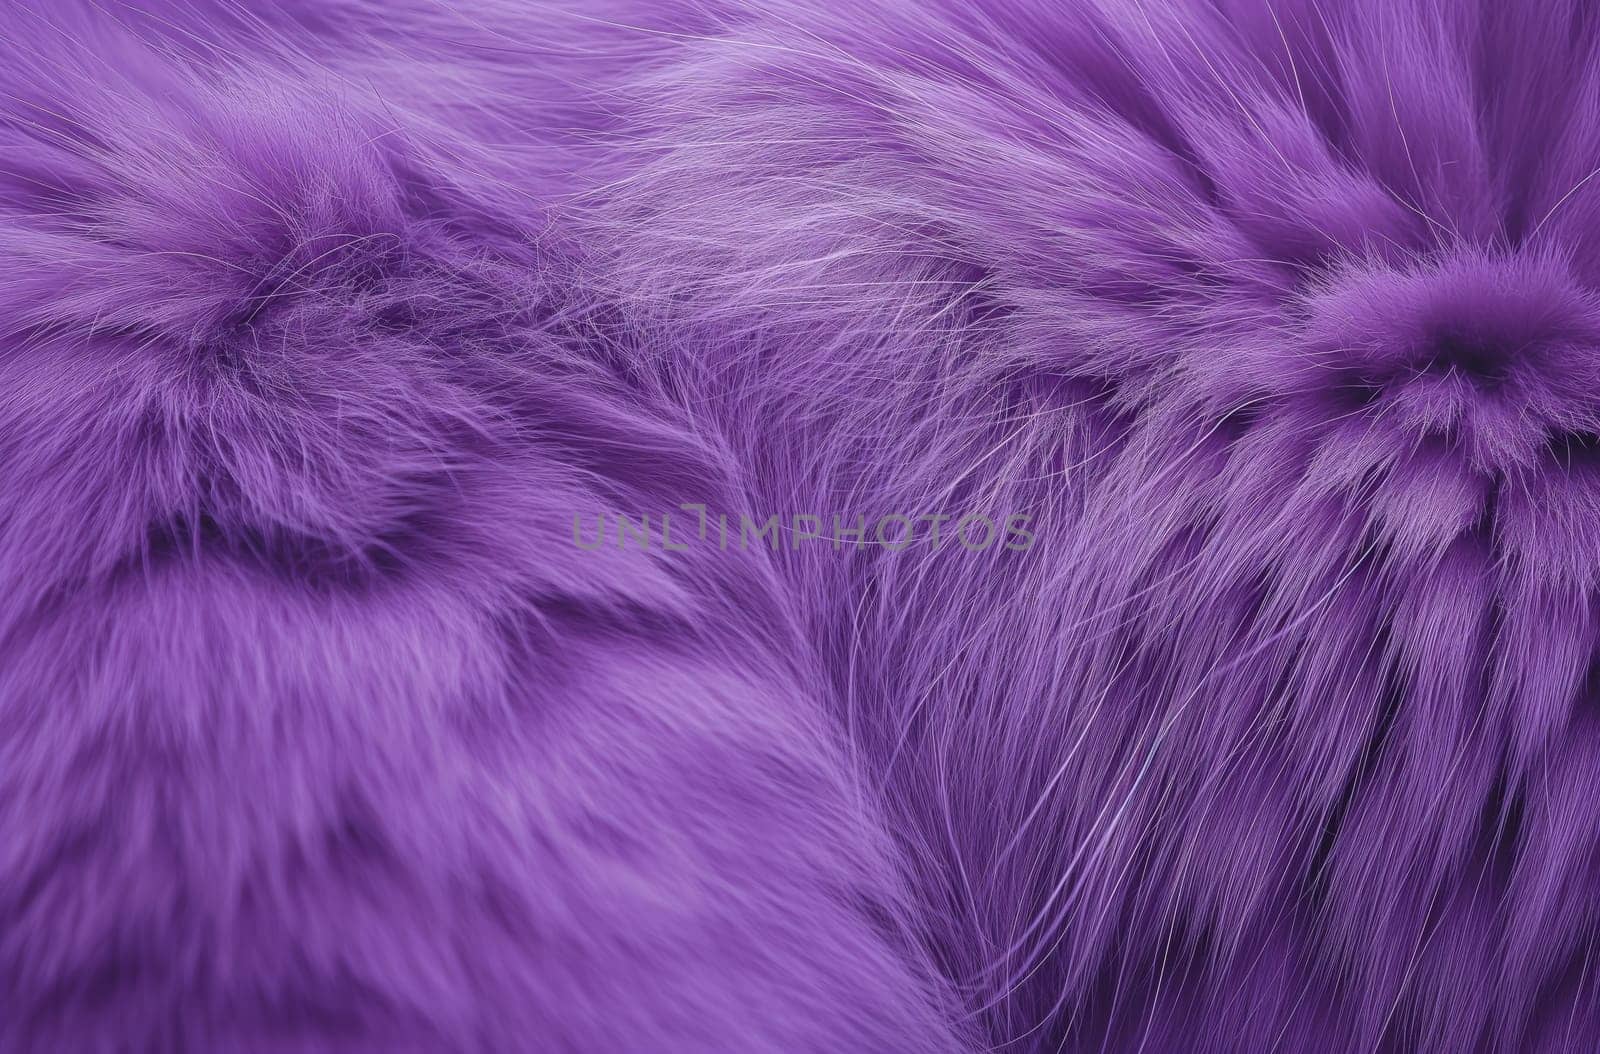 An image of purple fur with intricate details and variations in the direction of the fibers